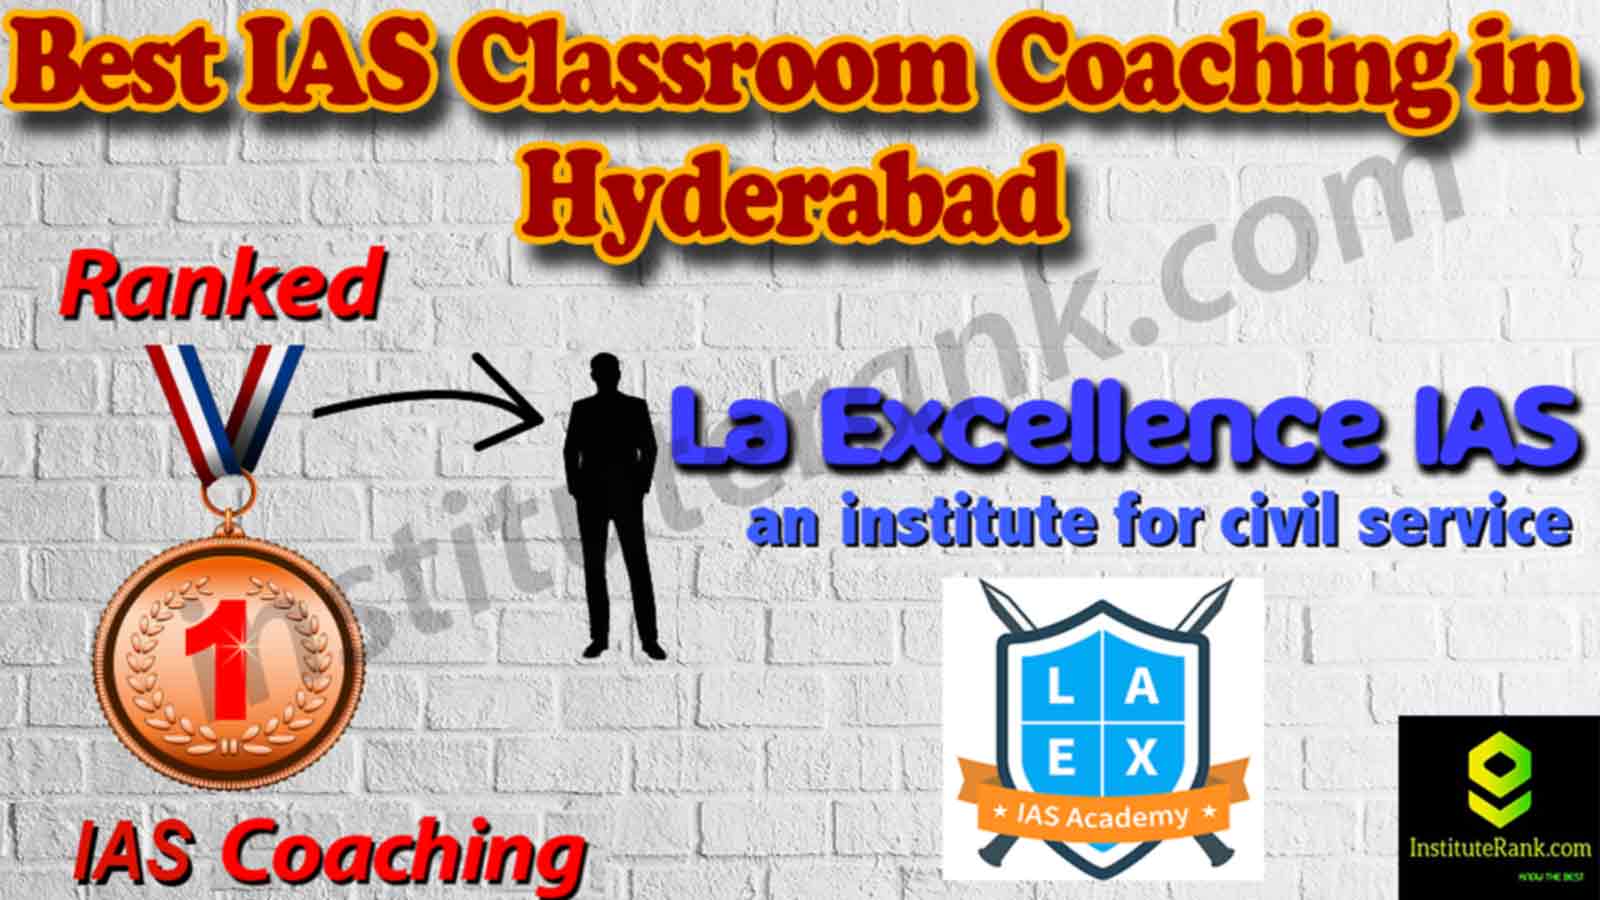 Best IAS Coaching and fees in Hyderabad